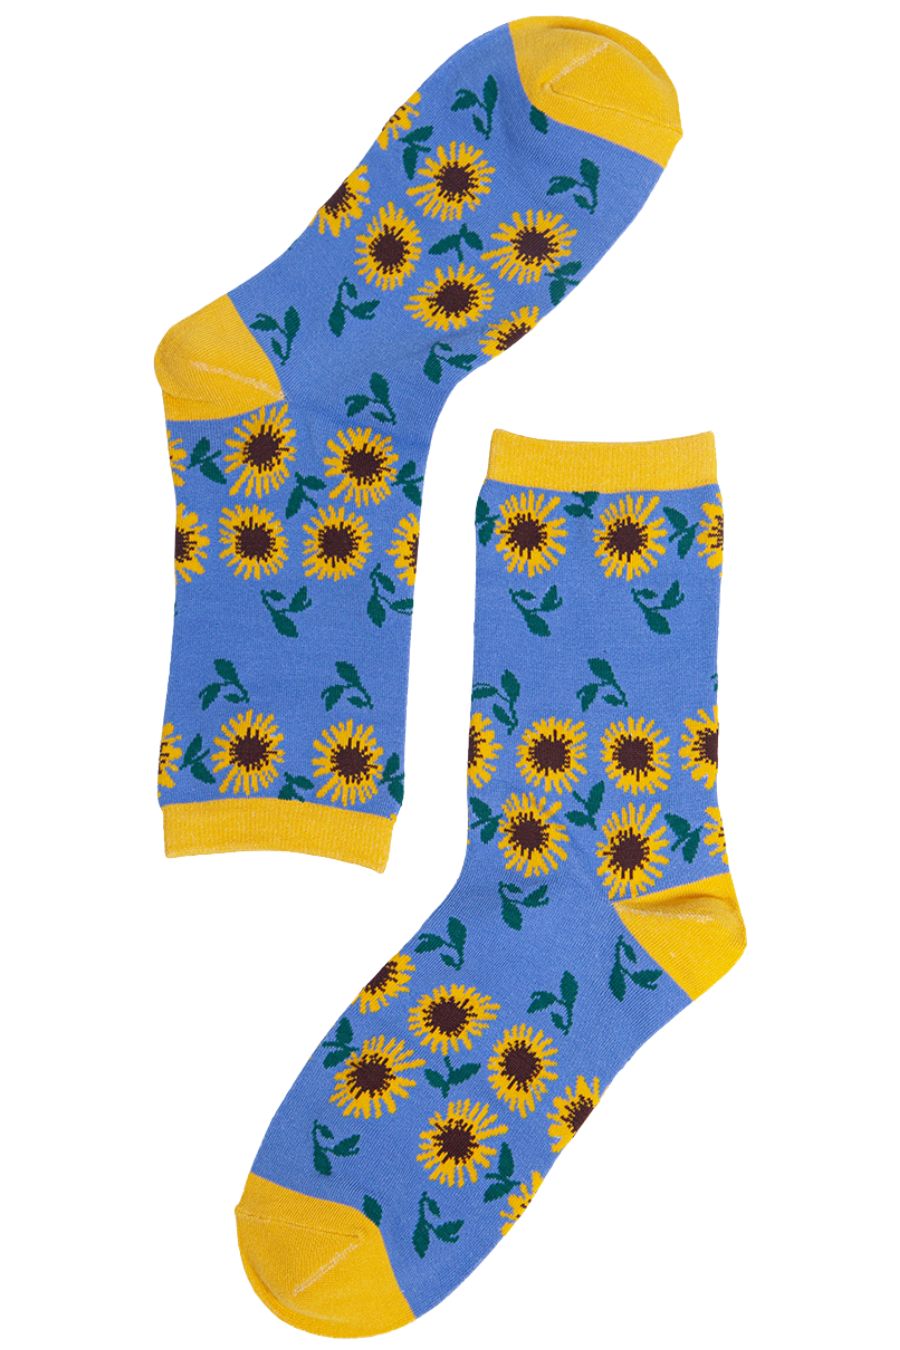 blue, yellow bamboo ankle sock with yellow sunflowers